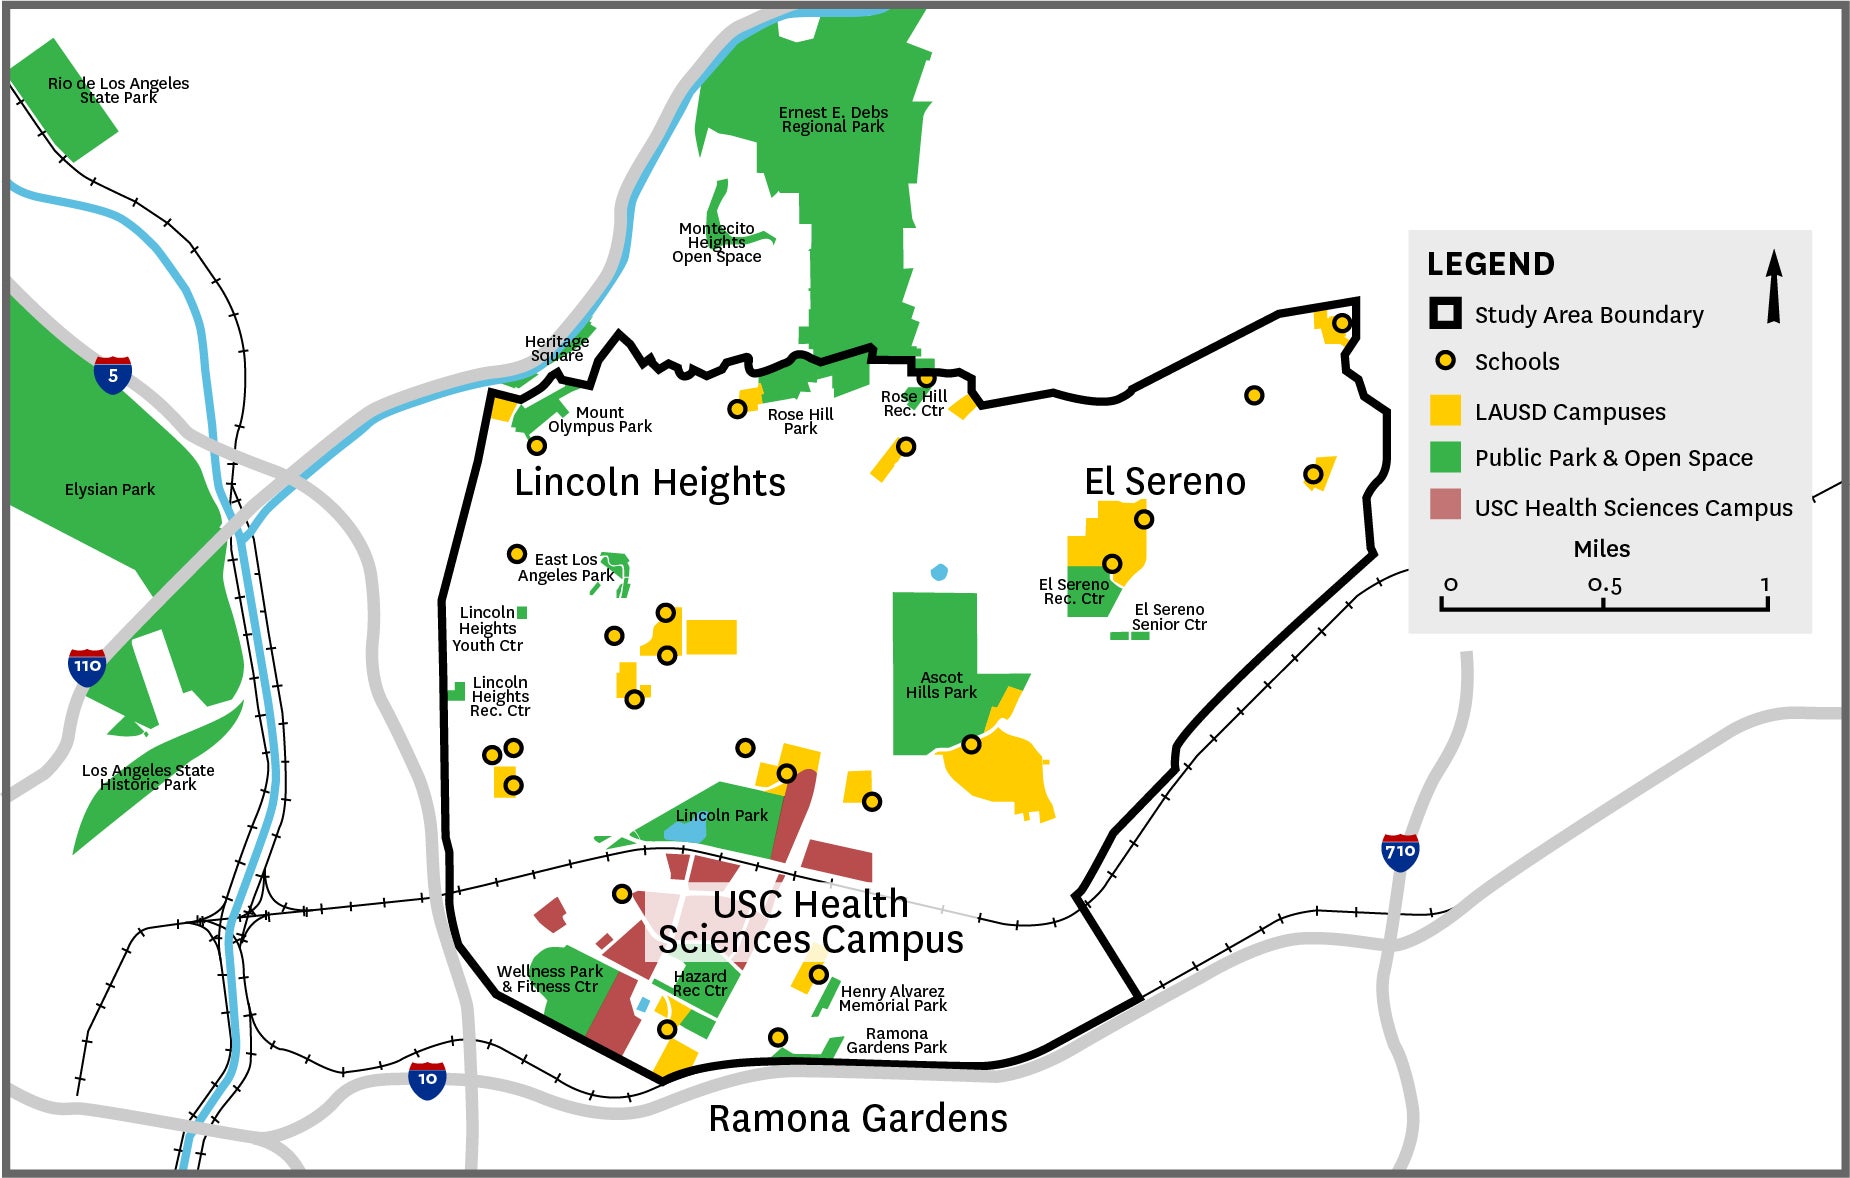 Line art map shows the area near USC's Health Sciences campus, including El Sereno, Ramona Gardens and parts of Lincoln Heights, that are part of the urban trees initiative